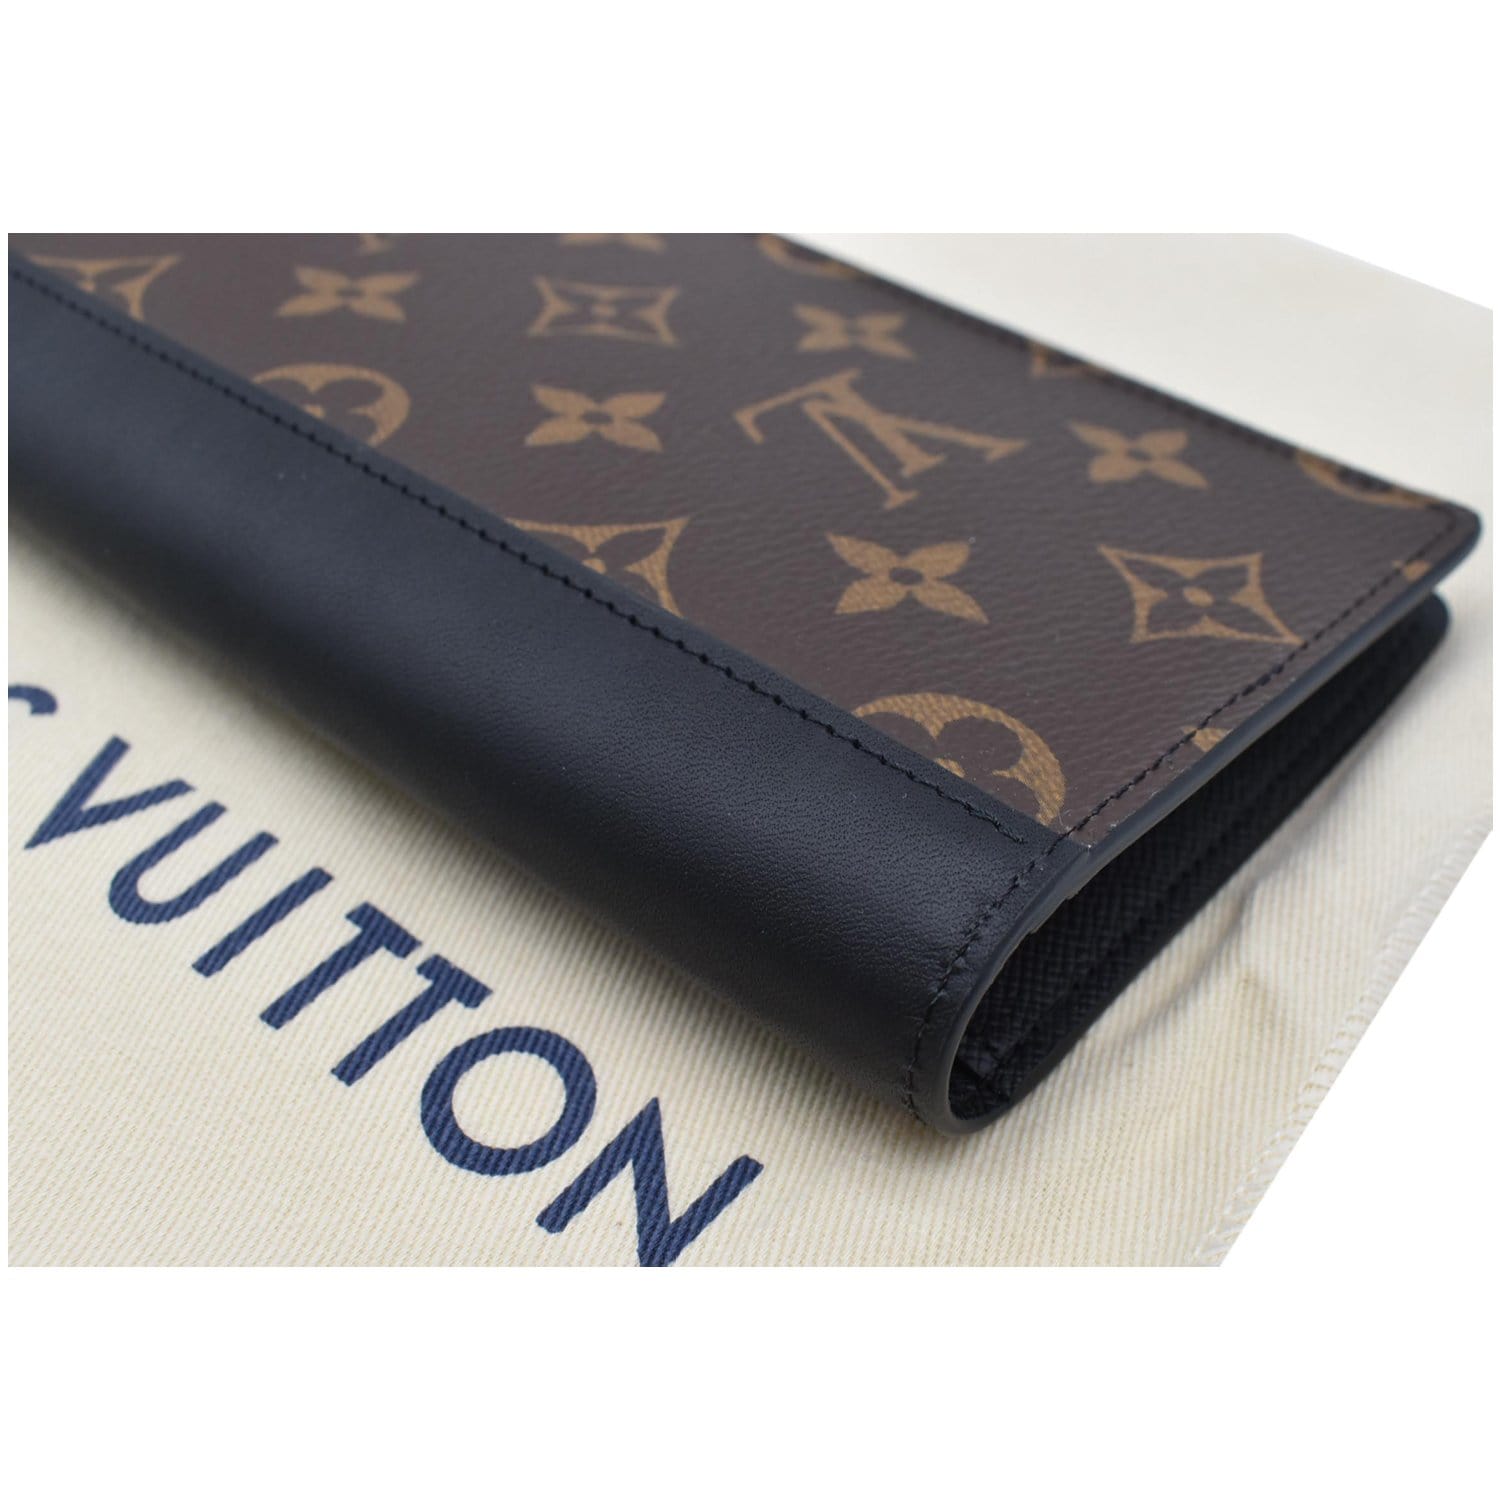 Brazza Wallet Monogram Macassar Canvas - Wallets and Small Leather